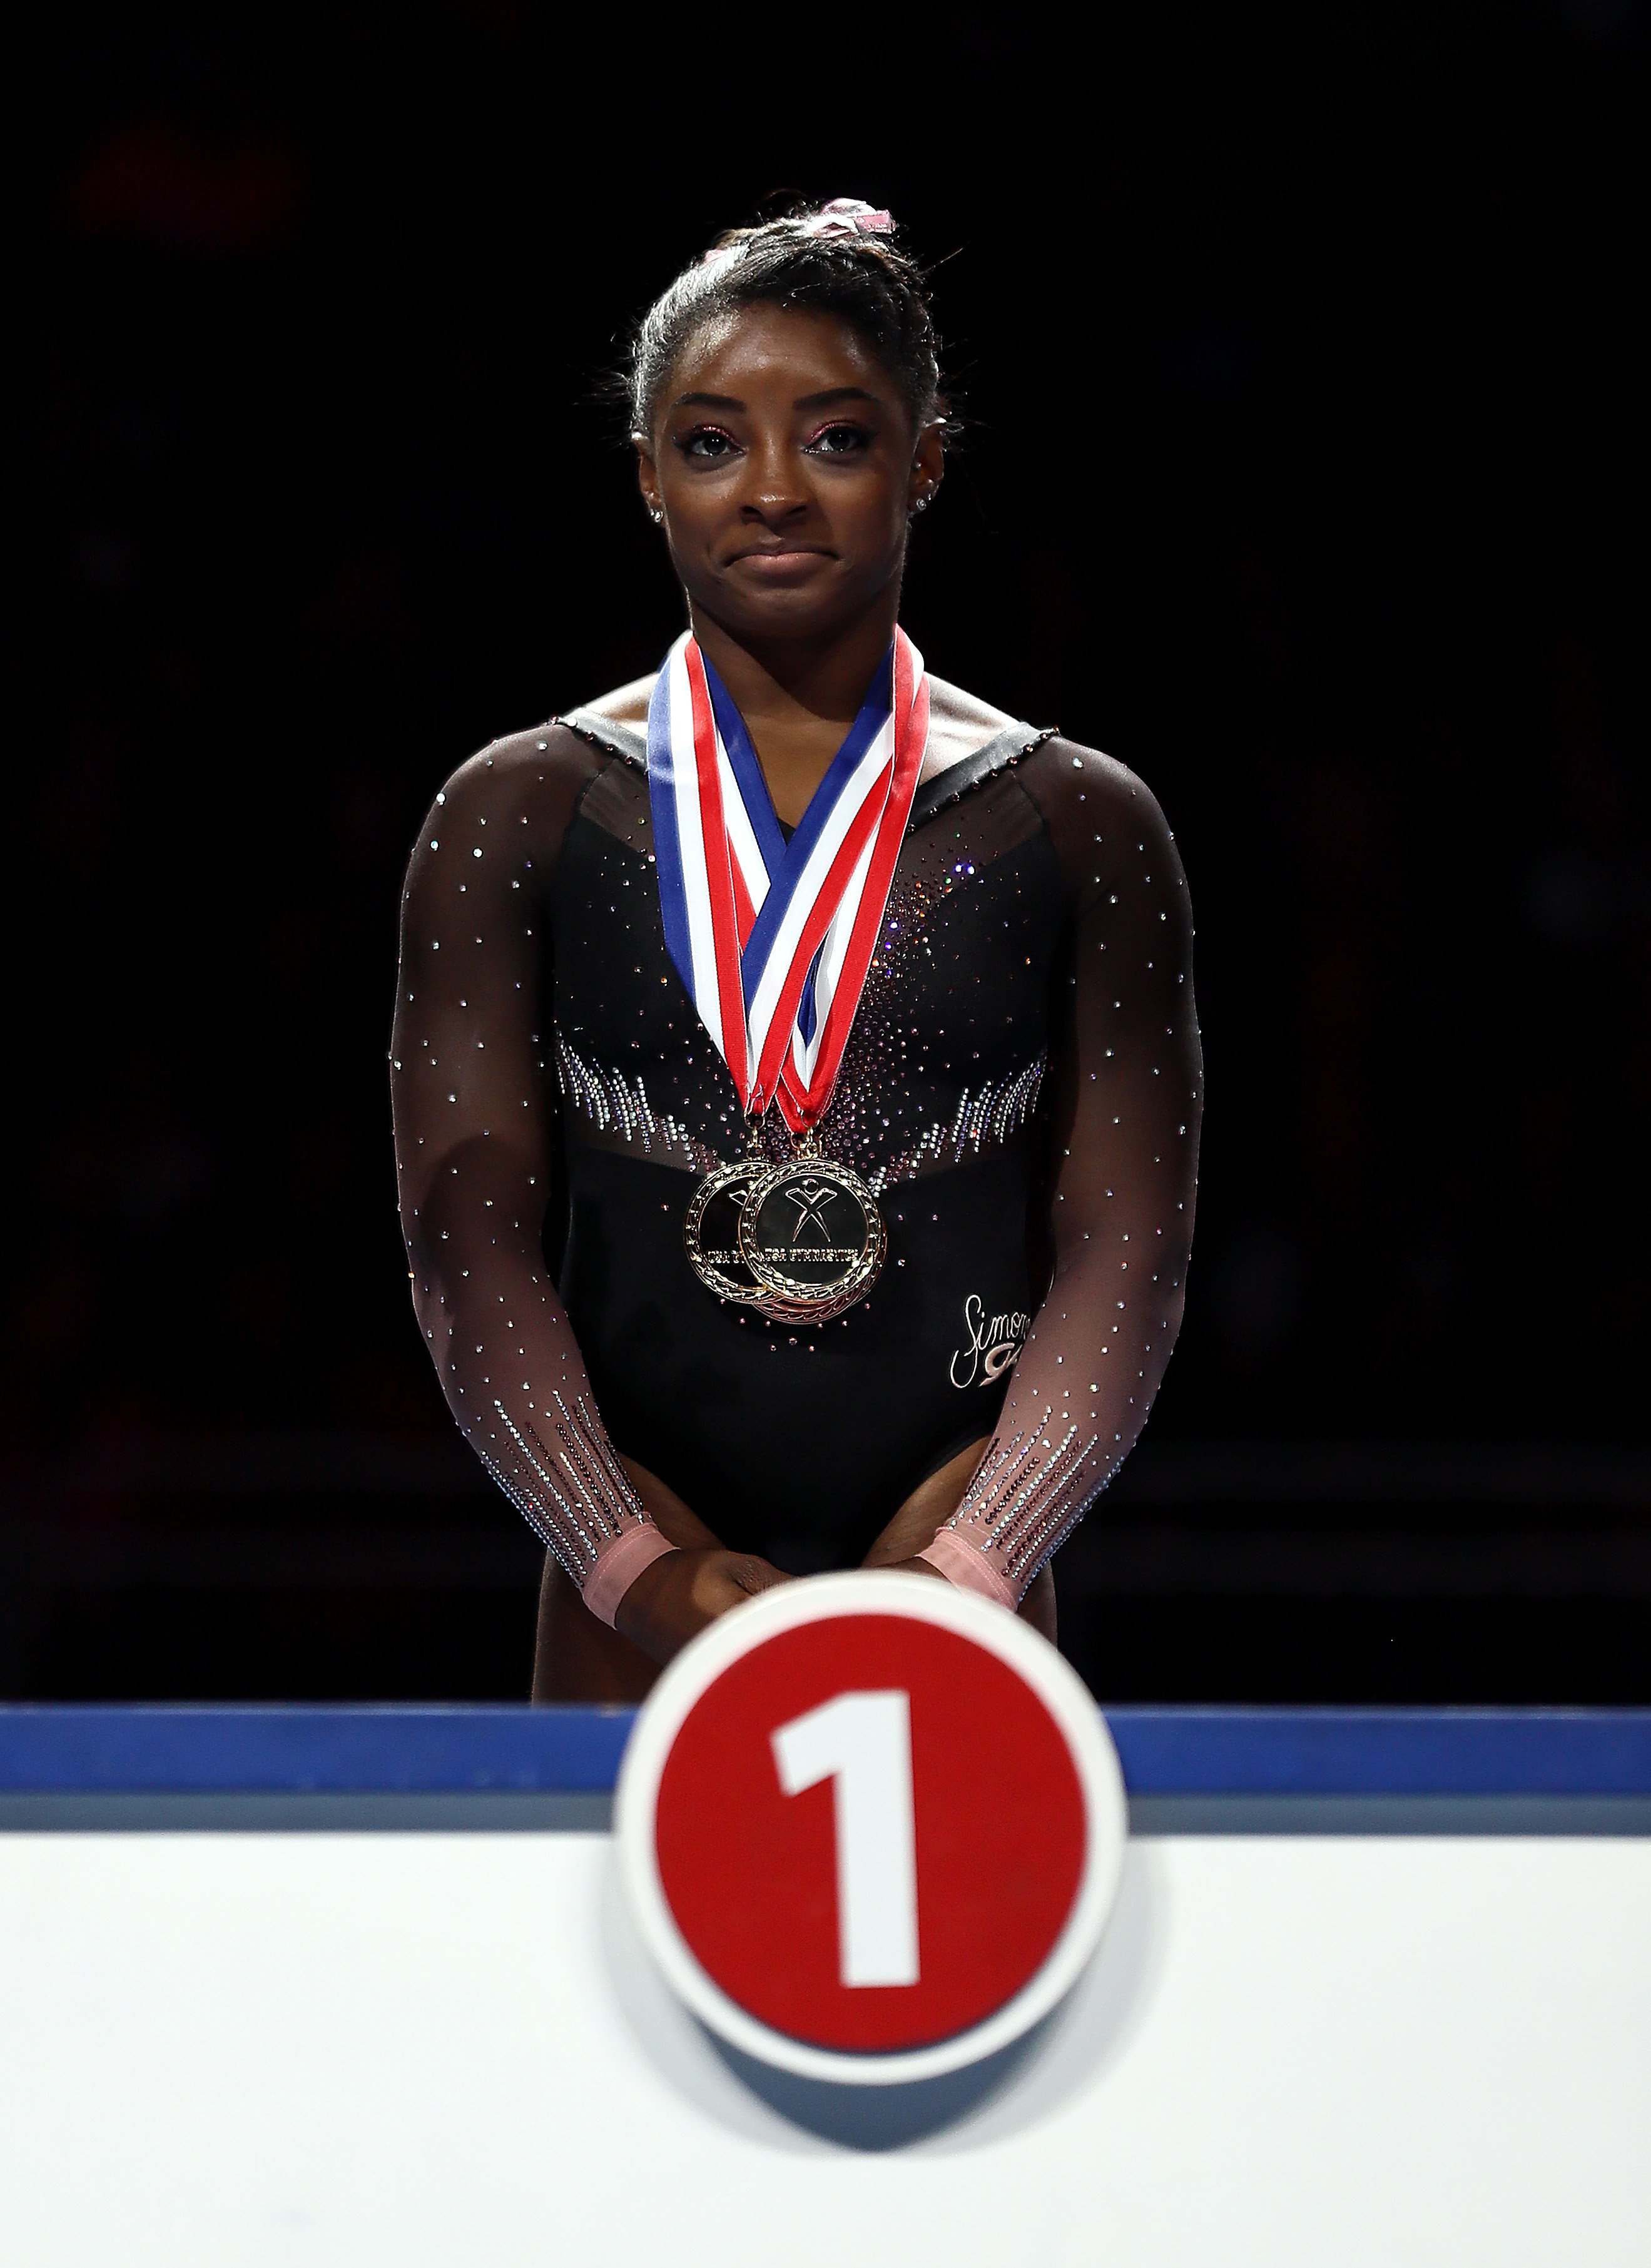 Simone Biles on the podium after accepting her gold medal during the Women's Senior competition at the 2019 US Gymnastics Championships on August 11, 2019. | Photo: Getty Images